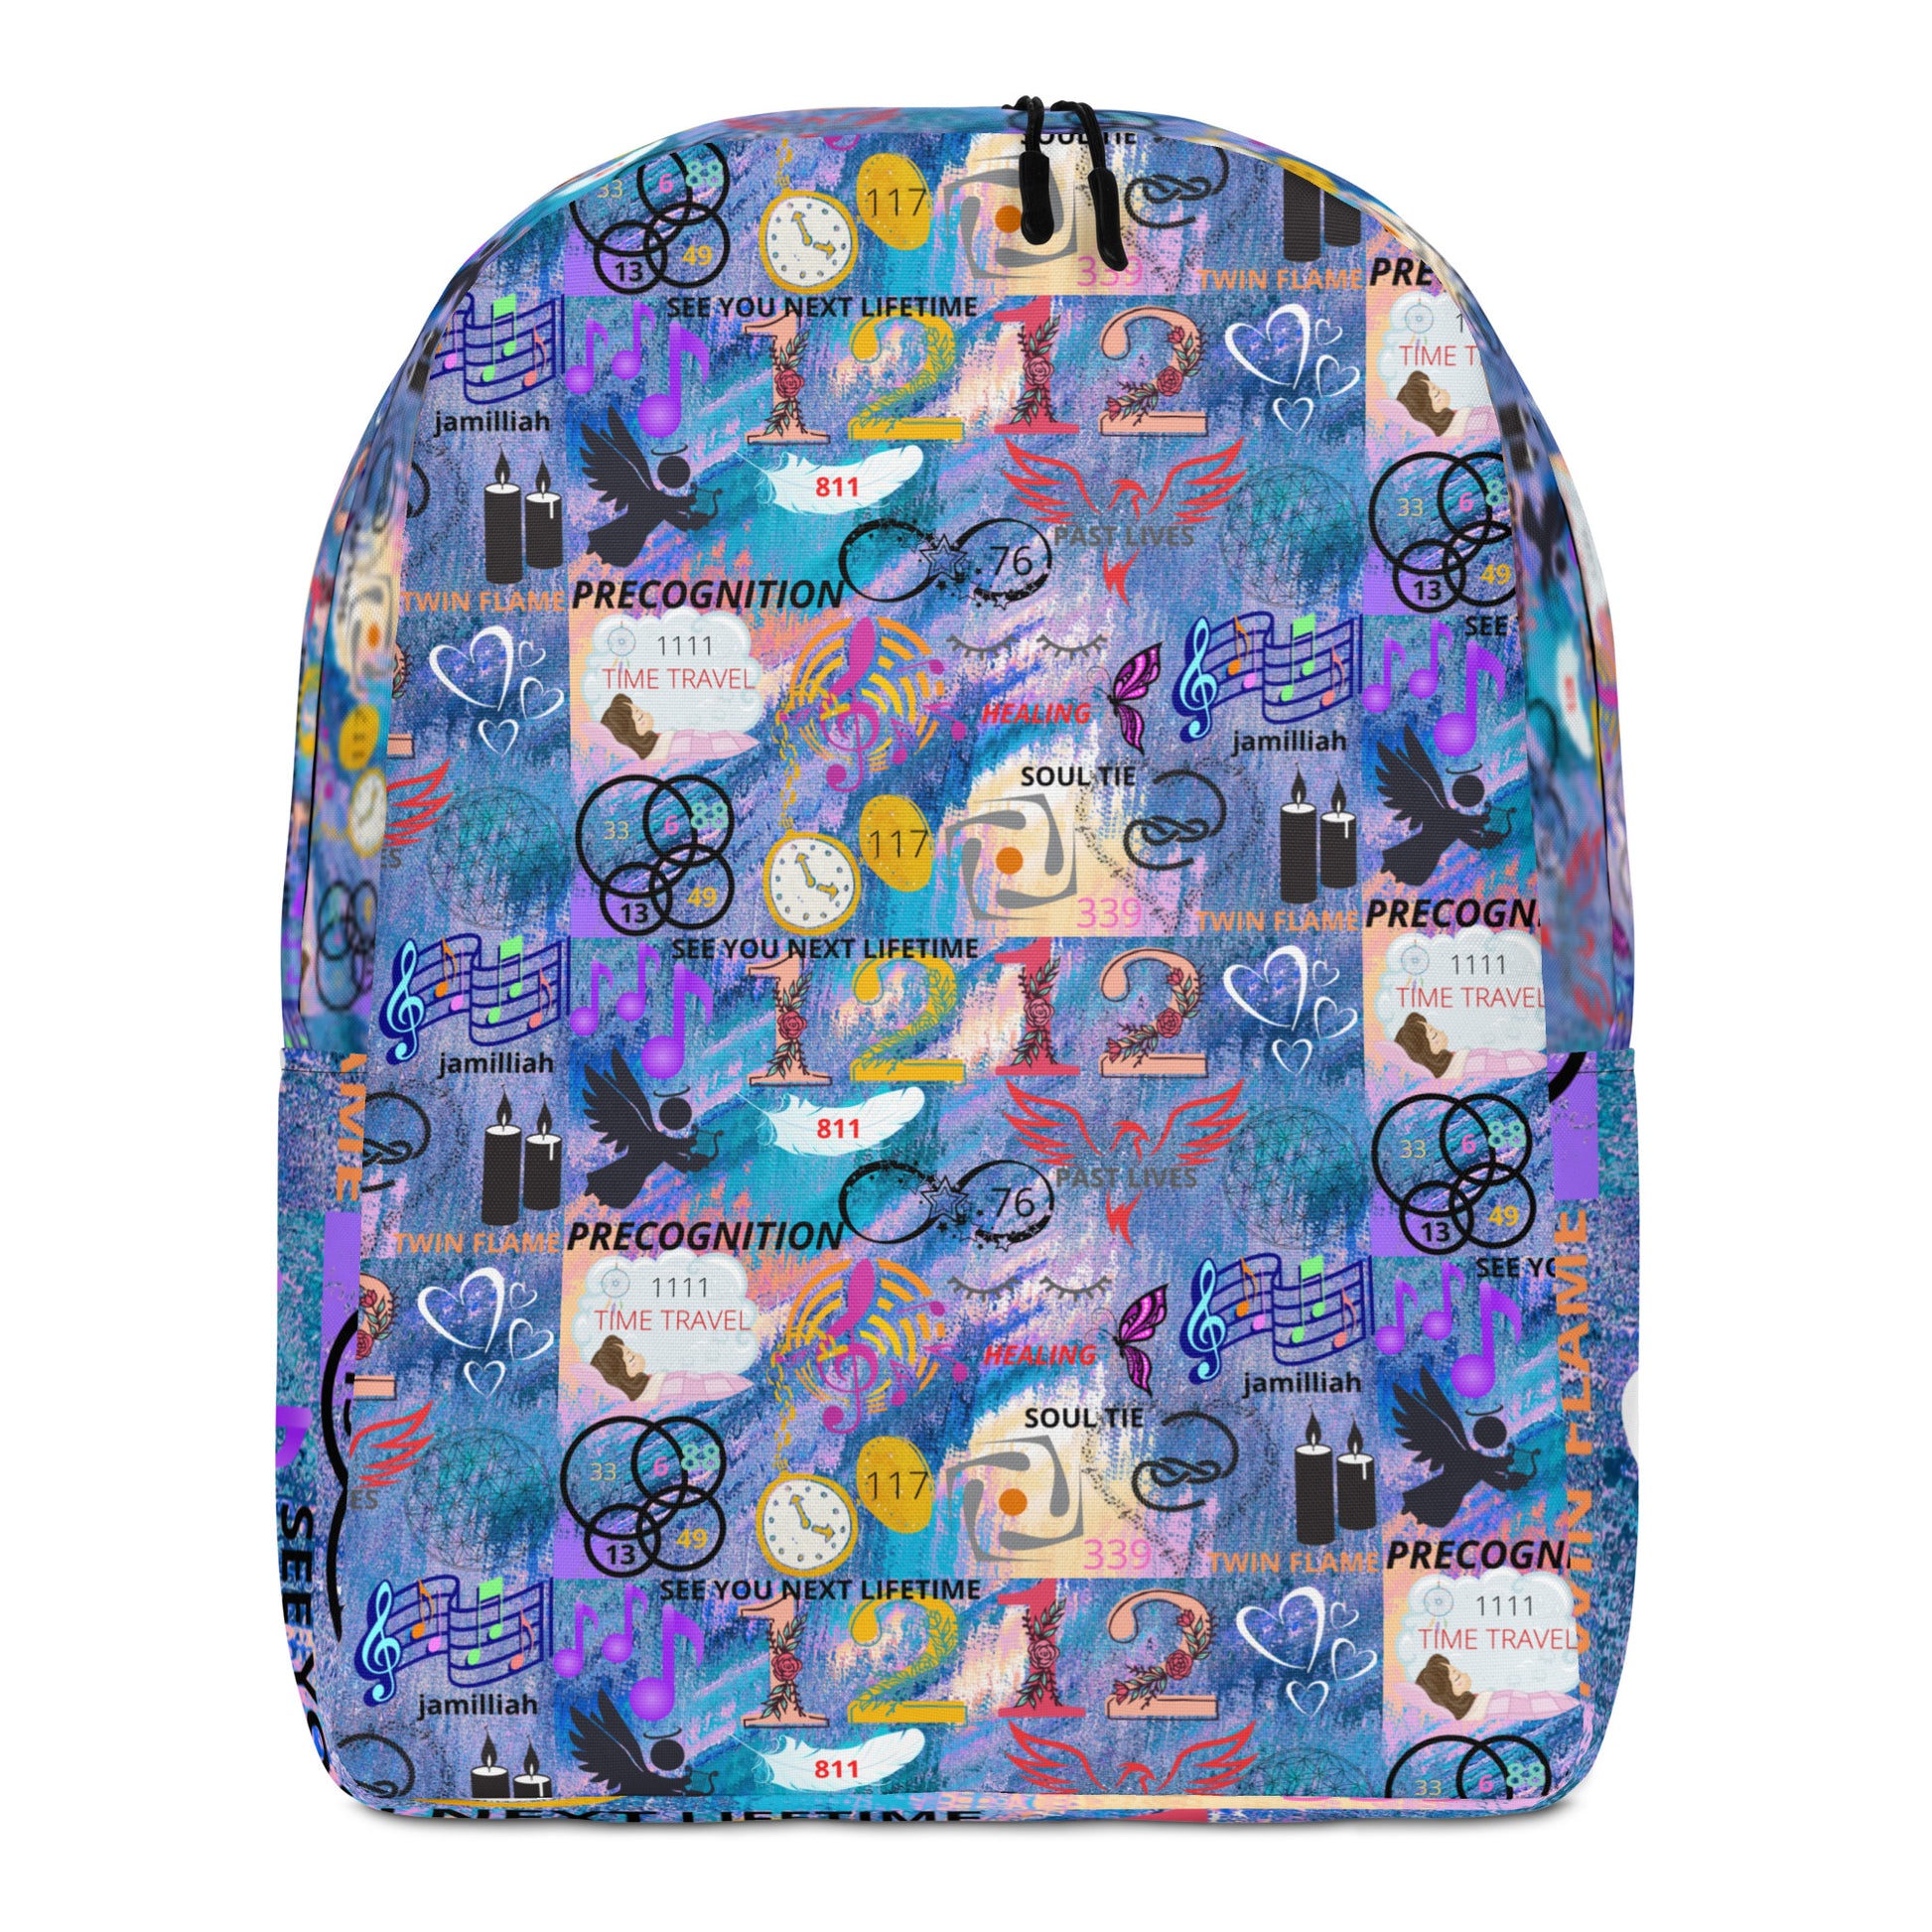 All-over print bluish/purple, minimalist backpack, front. Spiritual images and words of death, rebirth, transformation, reincarnation, love, and spiritual awakening. Psychic quote, "See You Next Lifetime," with angel numbers, angel, candles, hearts, feather, musical notes, phoenix, butterfly, infinity symbol, stars, circles, pocket watch, dream catcher, and dreamer in bed having premonitions. JAMILLIAH'S WISDOM IS TIMELESS SHOP - wisdomistimeless.com.